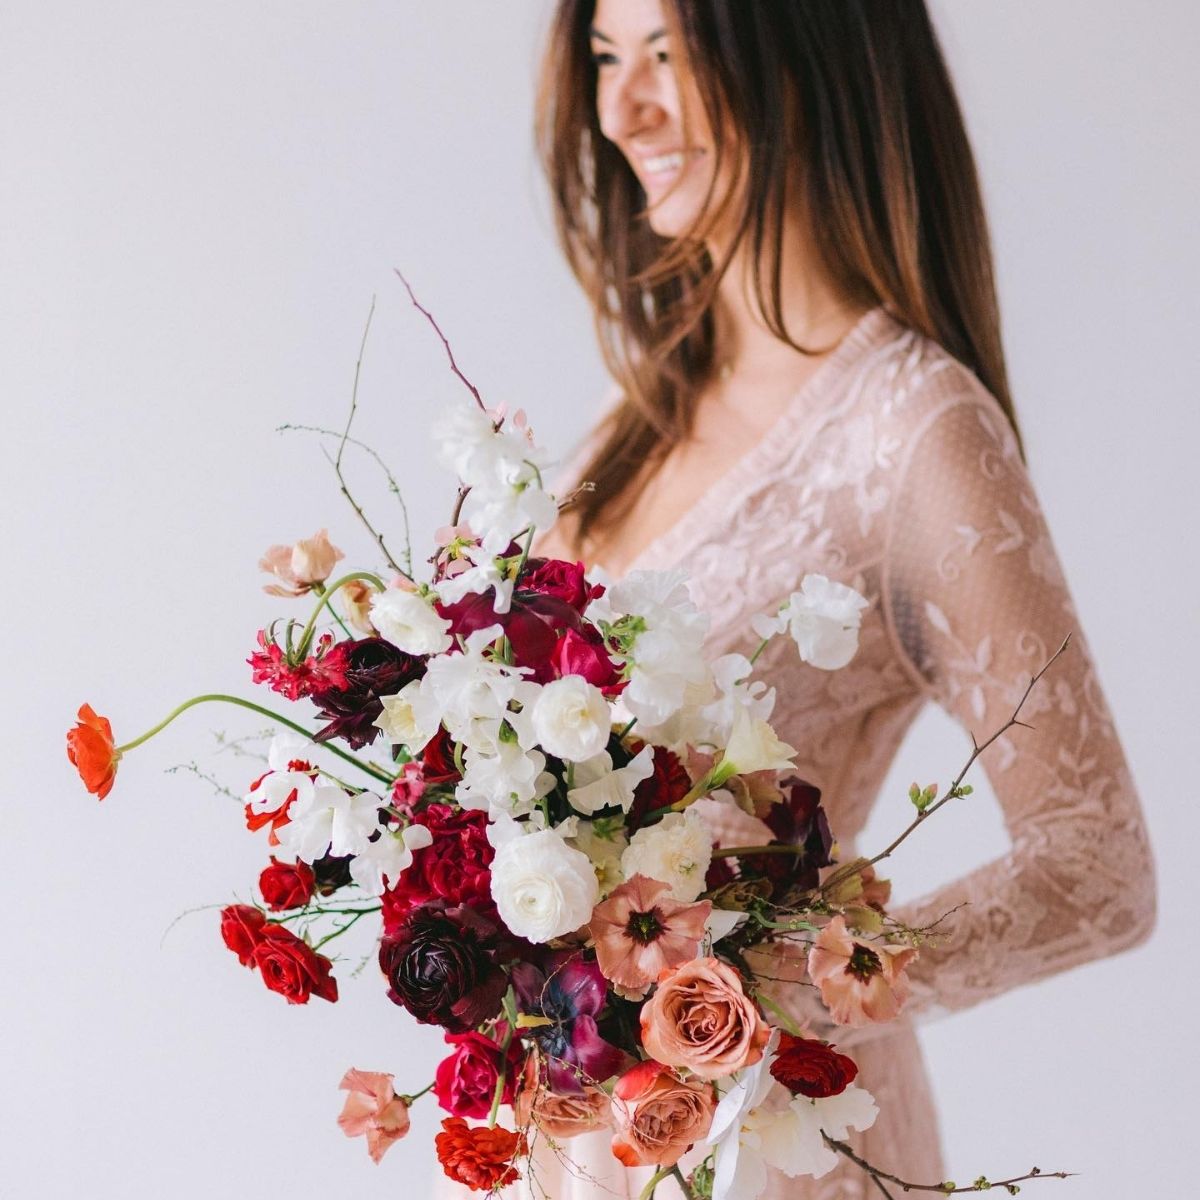 Paulina with a wedding bouquet in red, orange, creamy colors - on Thursd